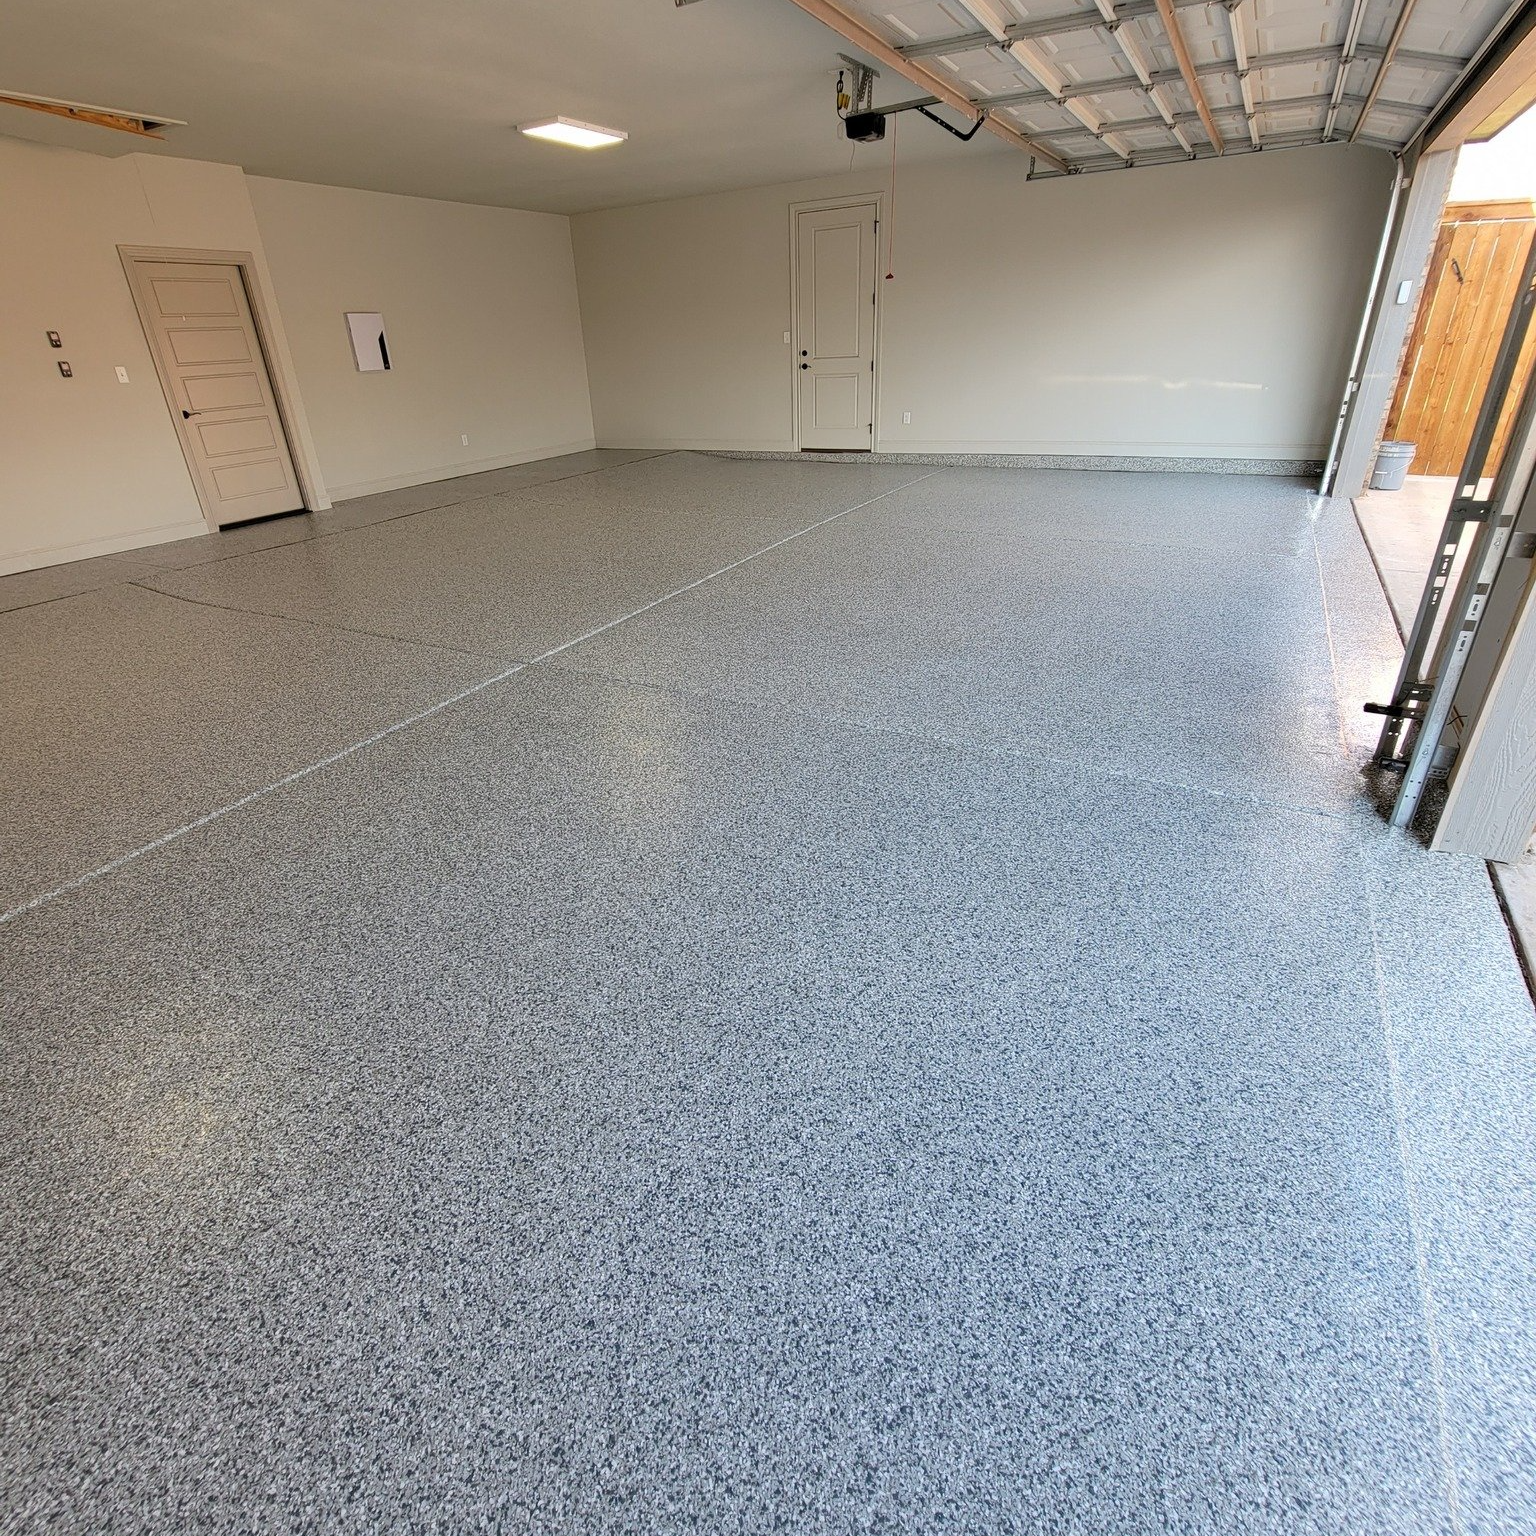 Learn how to choose the right garage floor coating for Texas weather.